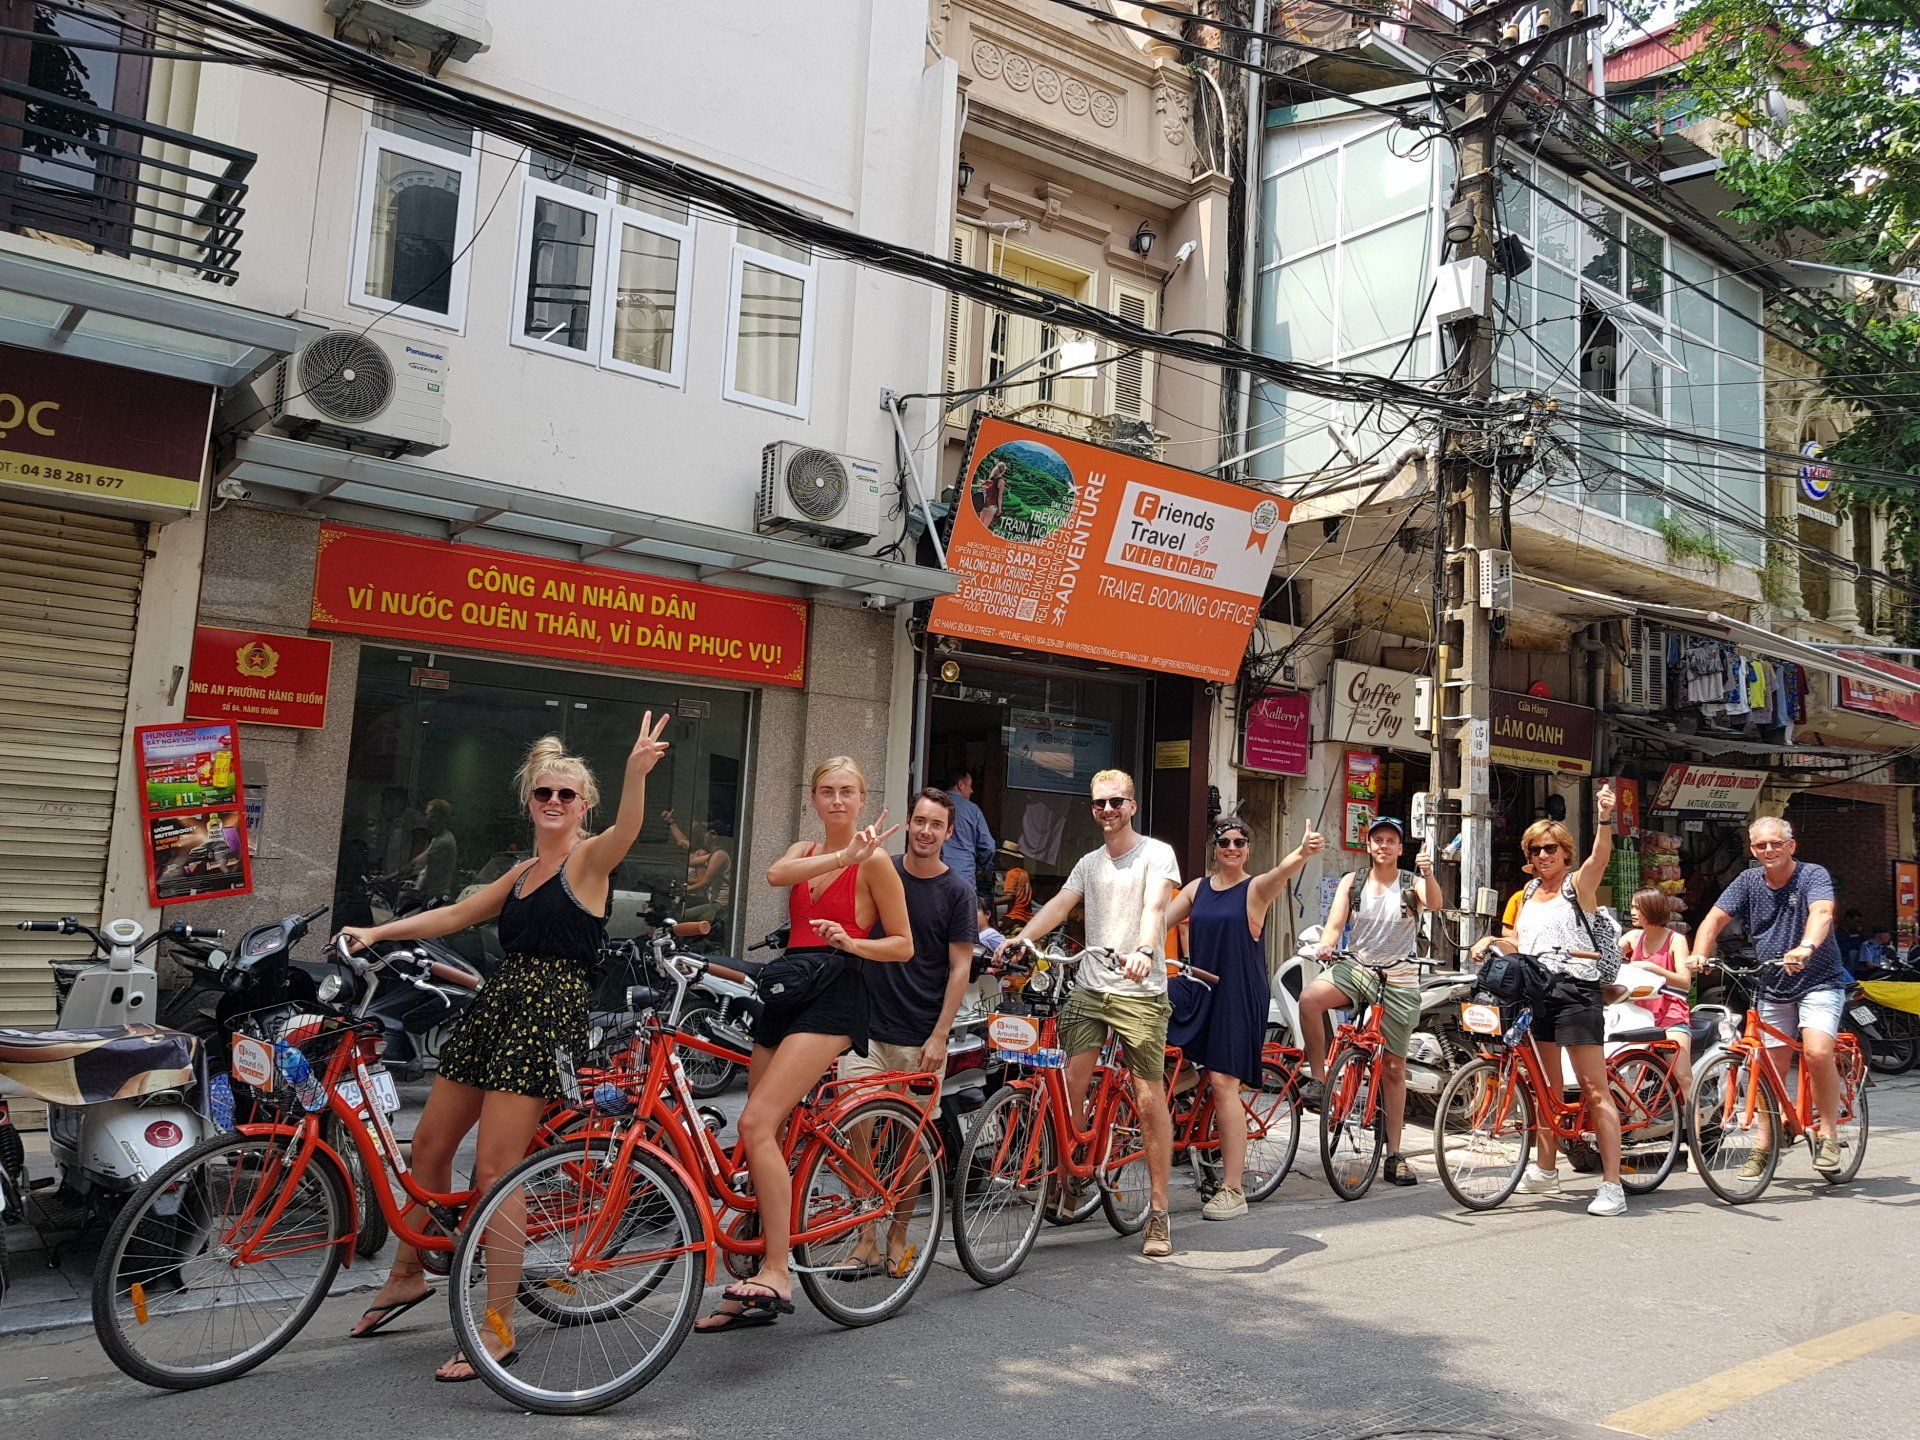 A group of people are riding bicycles down a city street.